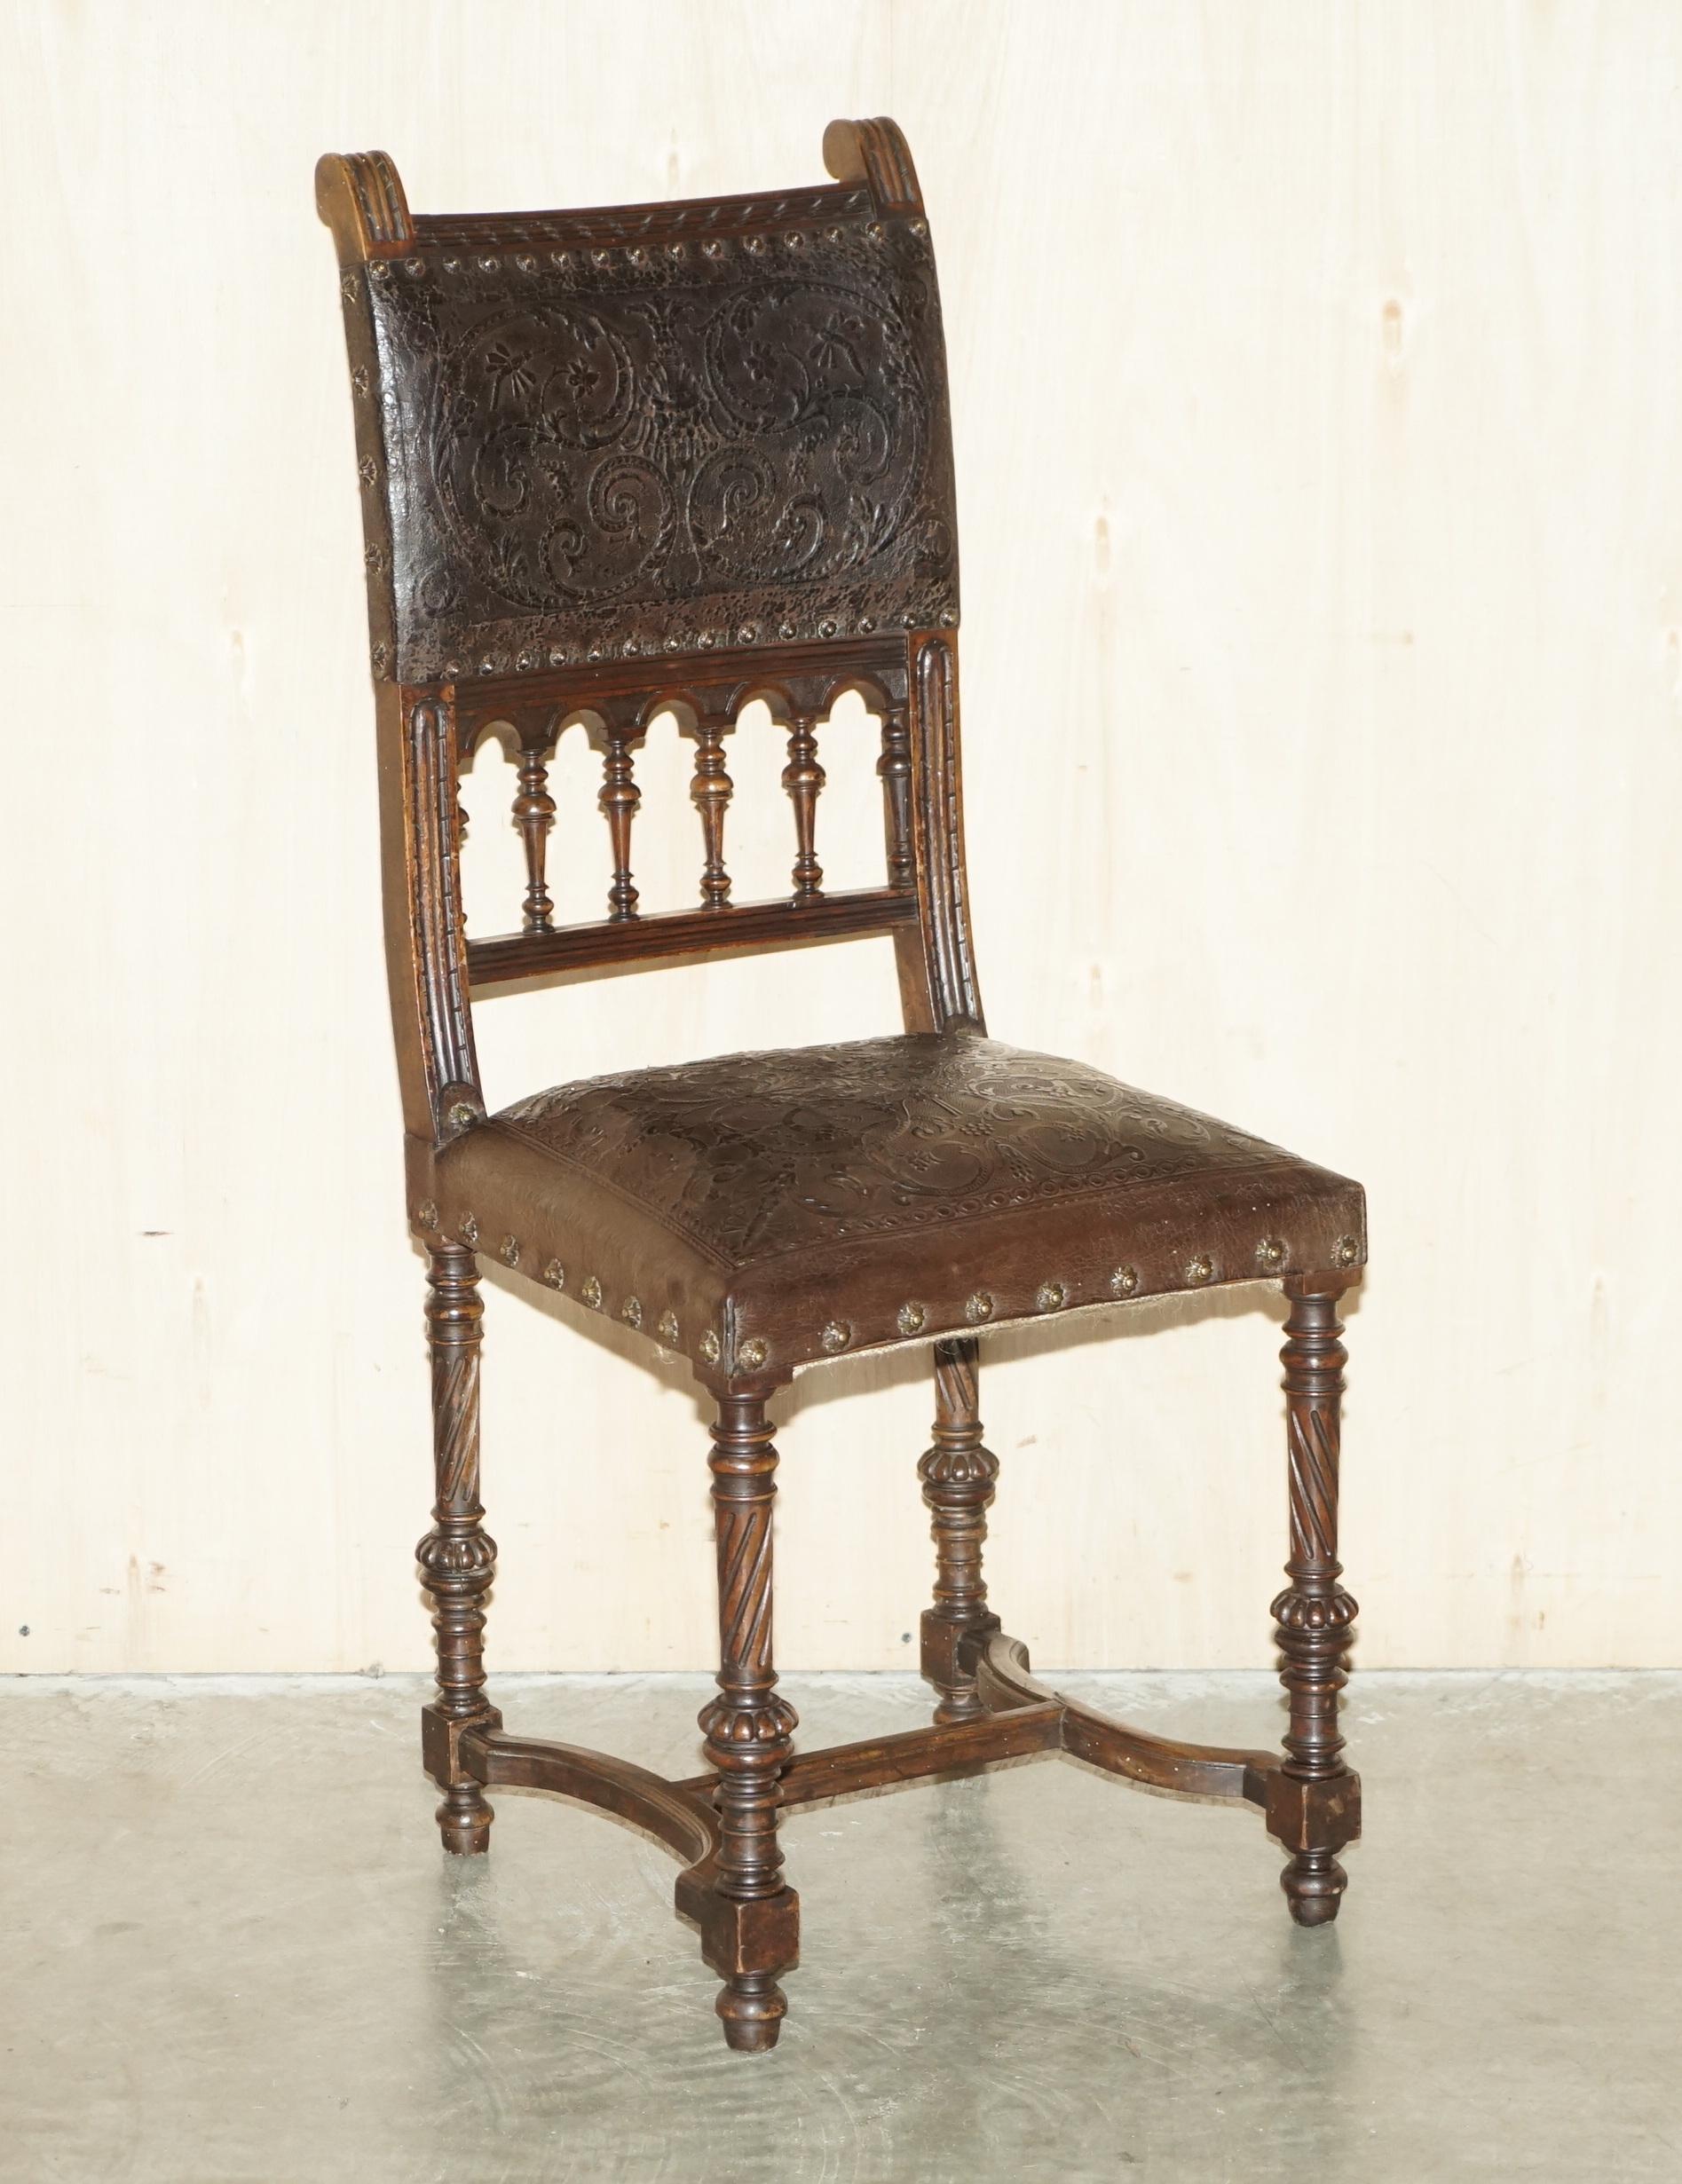 We are delighted to offer for sale this exceptional set of six French oak with Embossed pressed brown leather upholstered Henry II circa 1880 dining chairs

A very rare and totally original set of Victorian dining chairs. They have the original